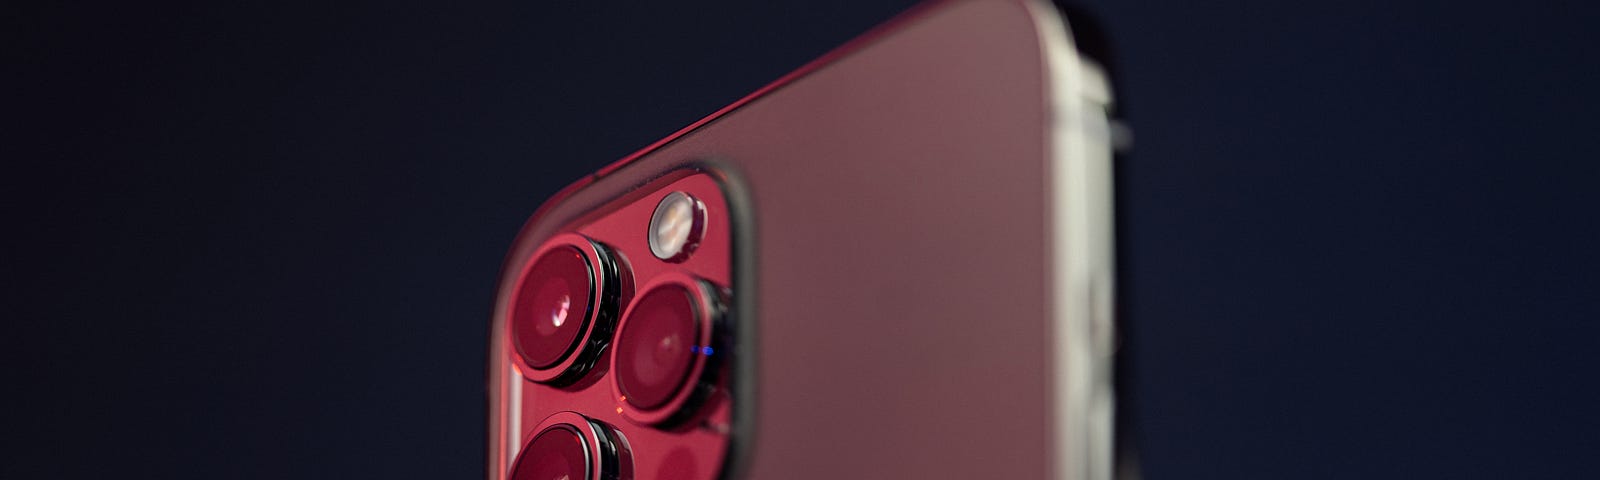 Down-angle view of iPhone 13 Pro Max